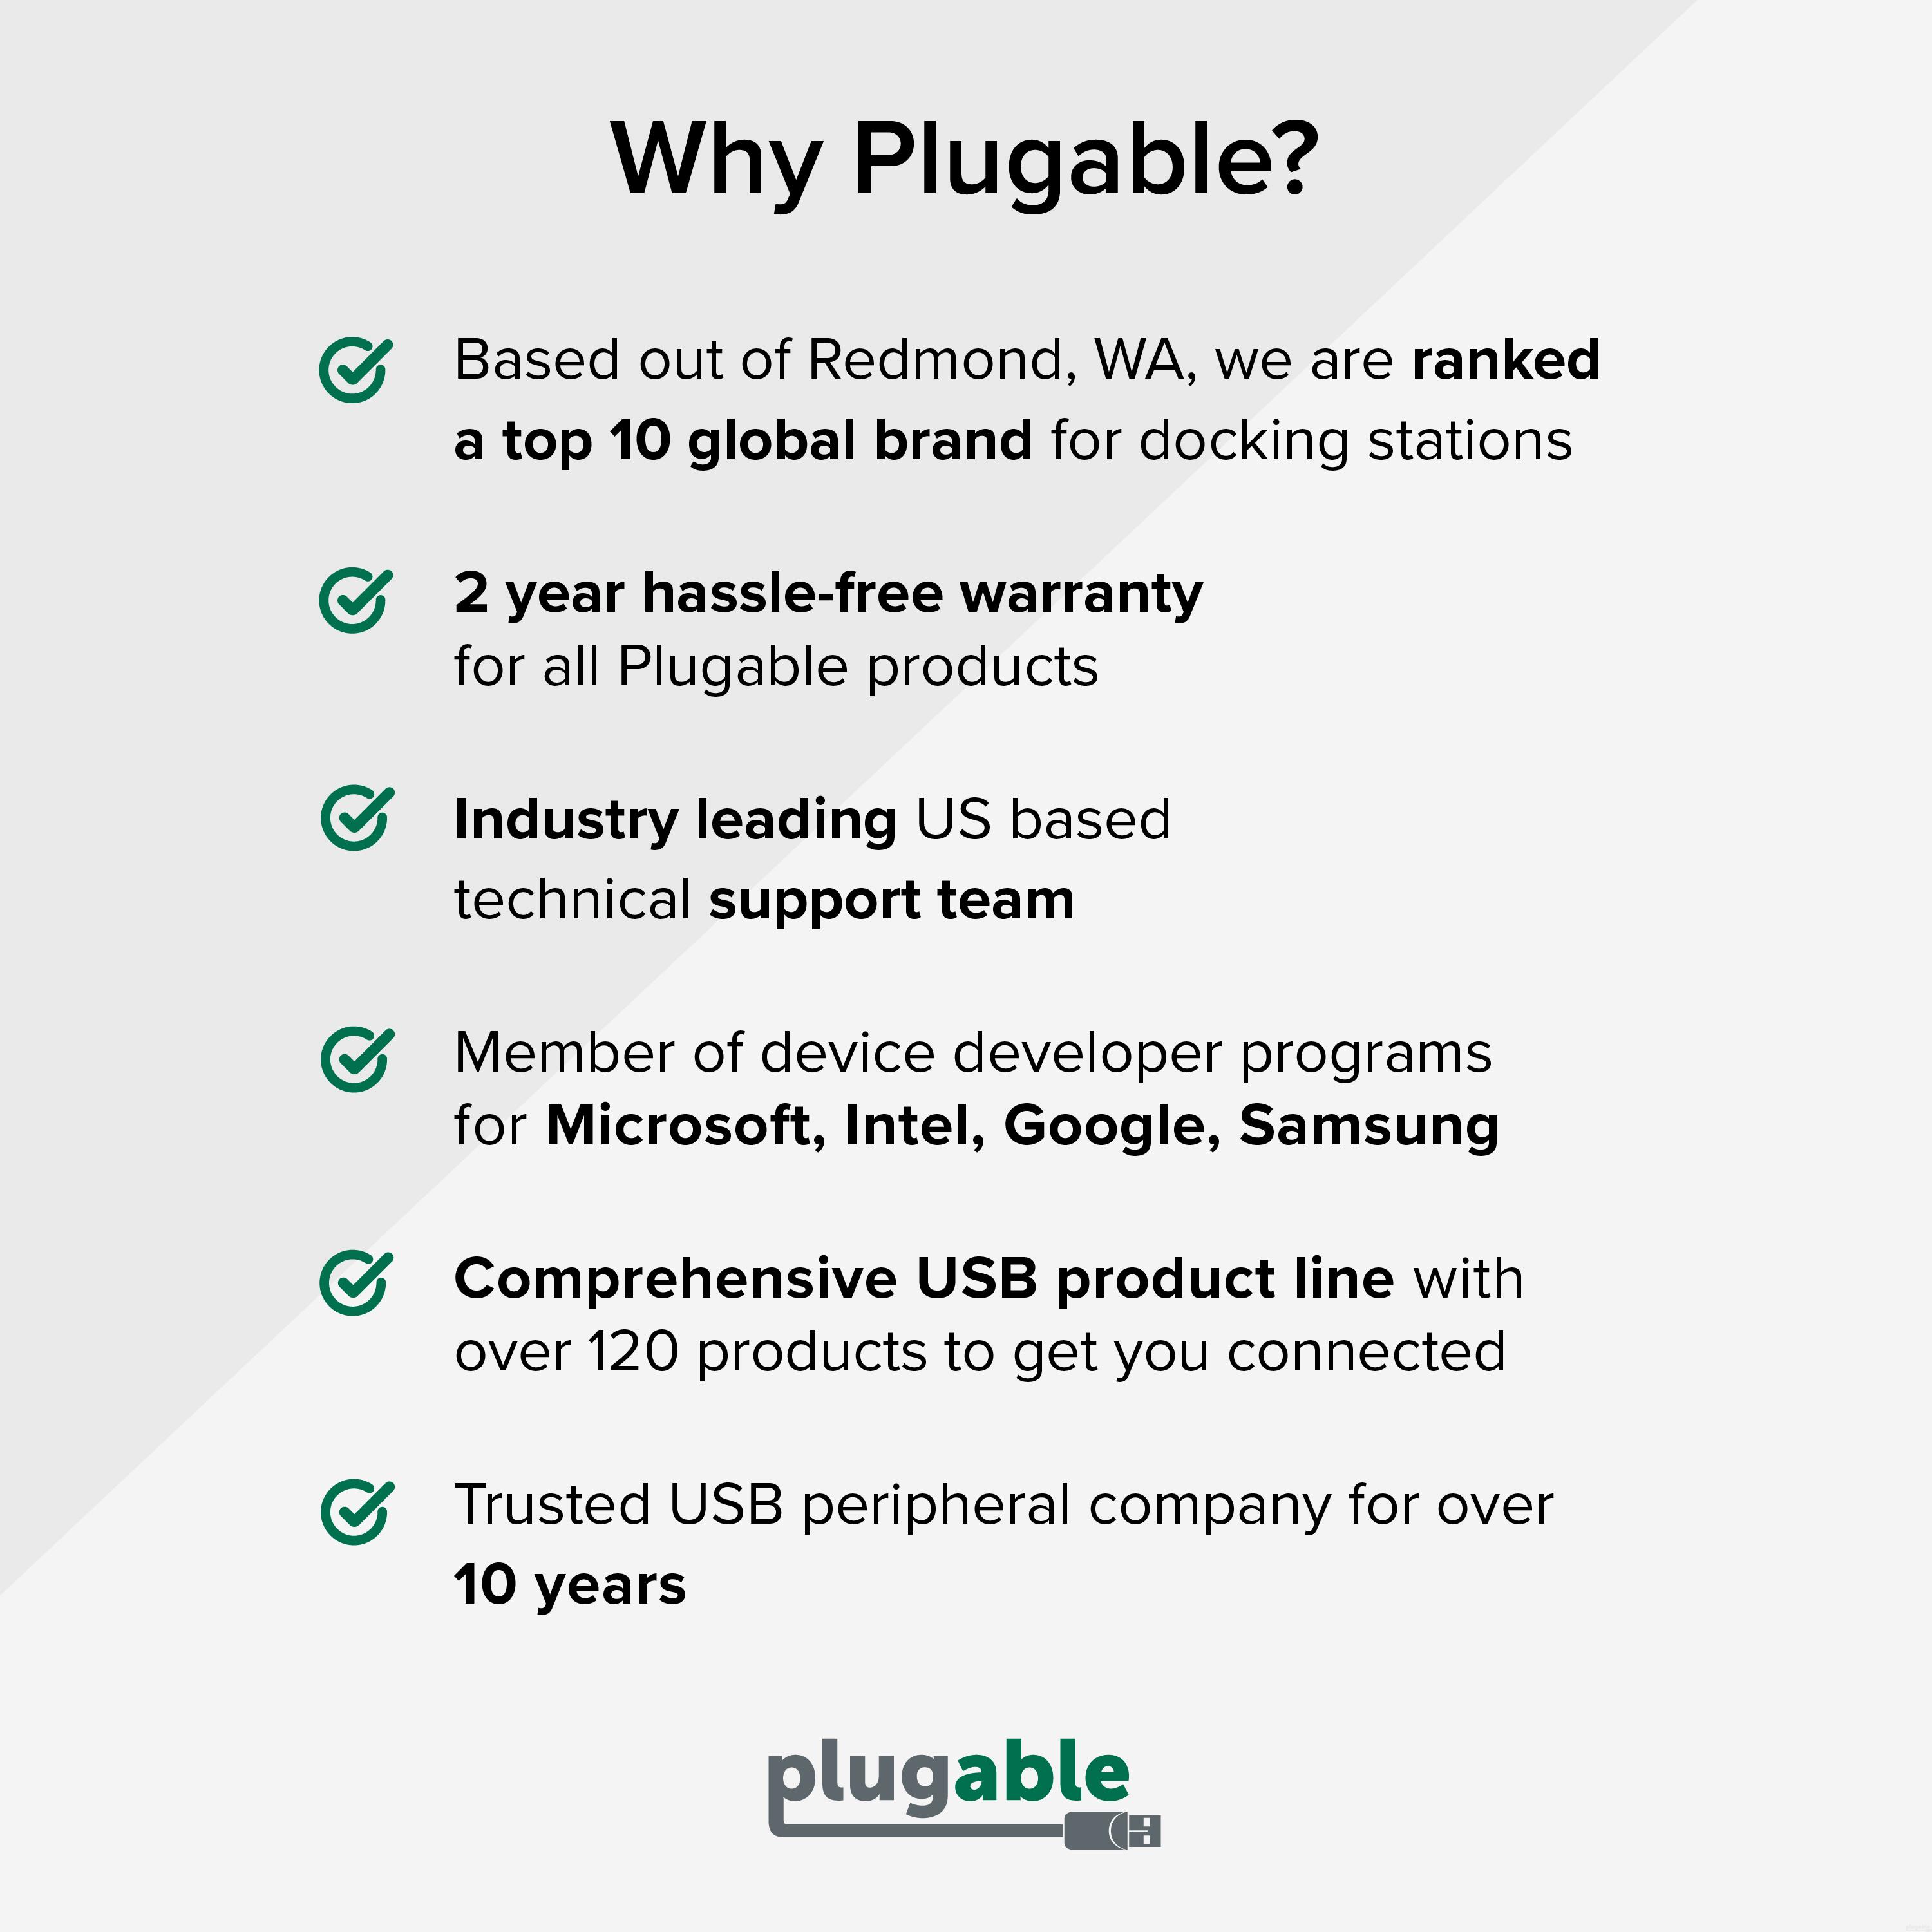 Plugable USB C to HDMI 2.0 Adapter Compatible with 2018 iPad Pro, 2018 MacBook Air, 2018 MacBook Pro, Dell XPS 13 & 15, Thunderbolt 3 Ports & More (Supports Resolutions up to 4K@60Hz) - image 6 of 6